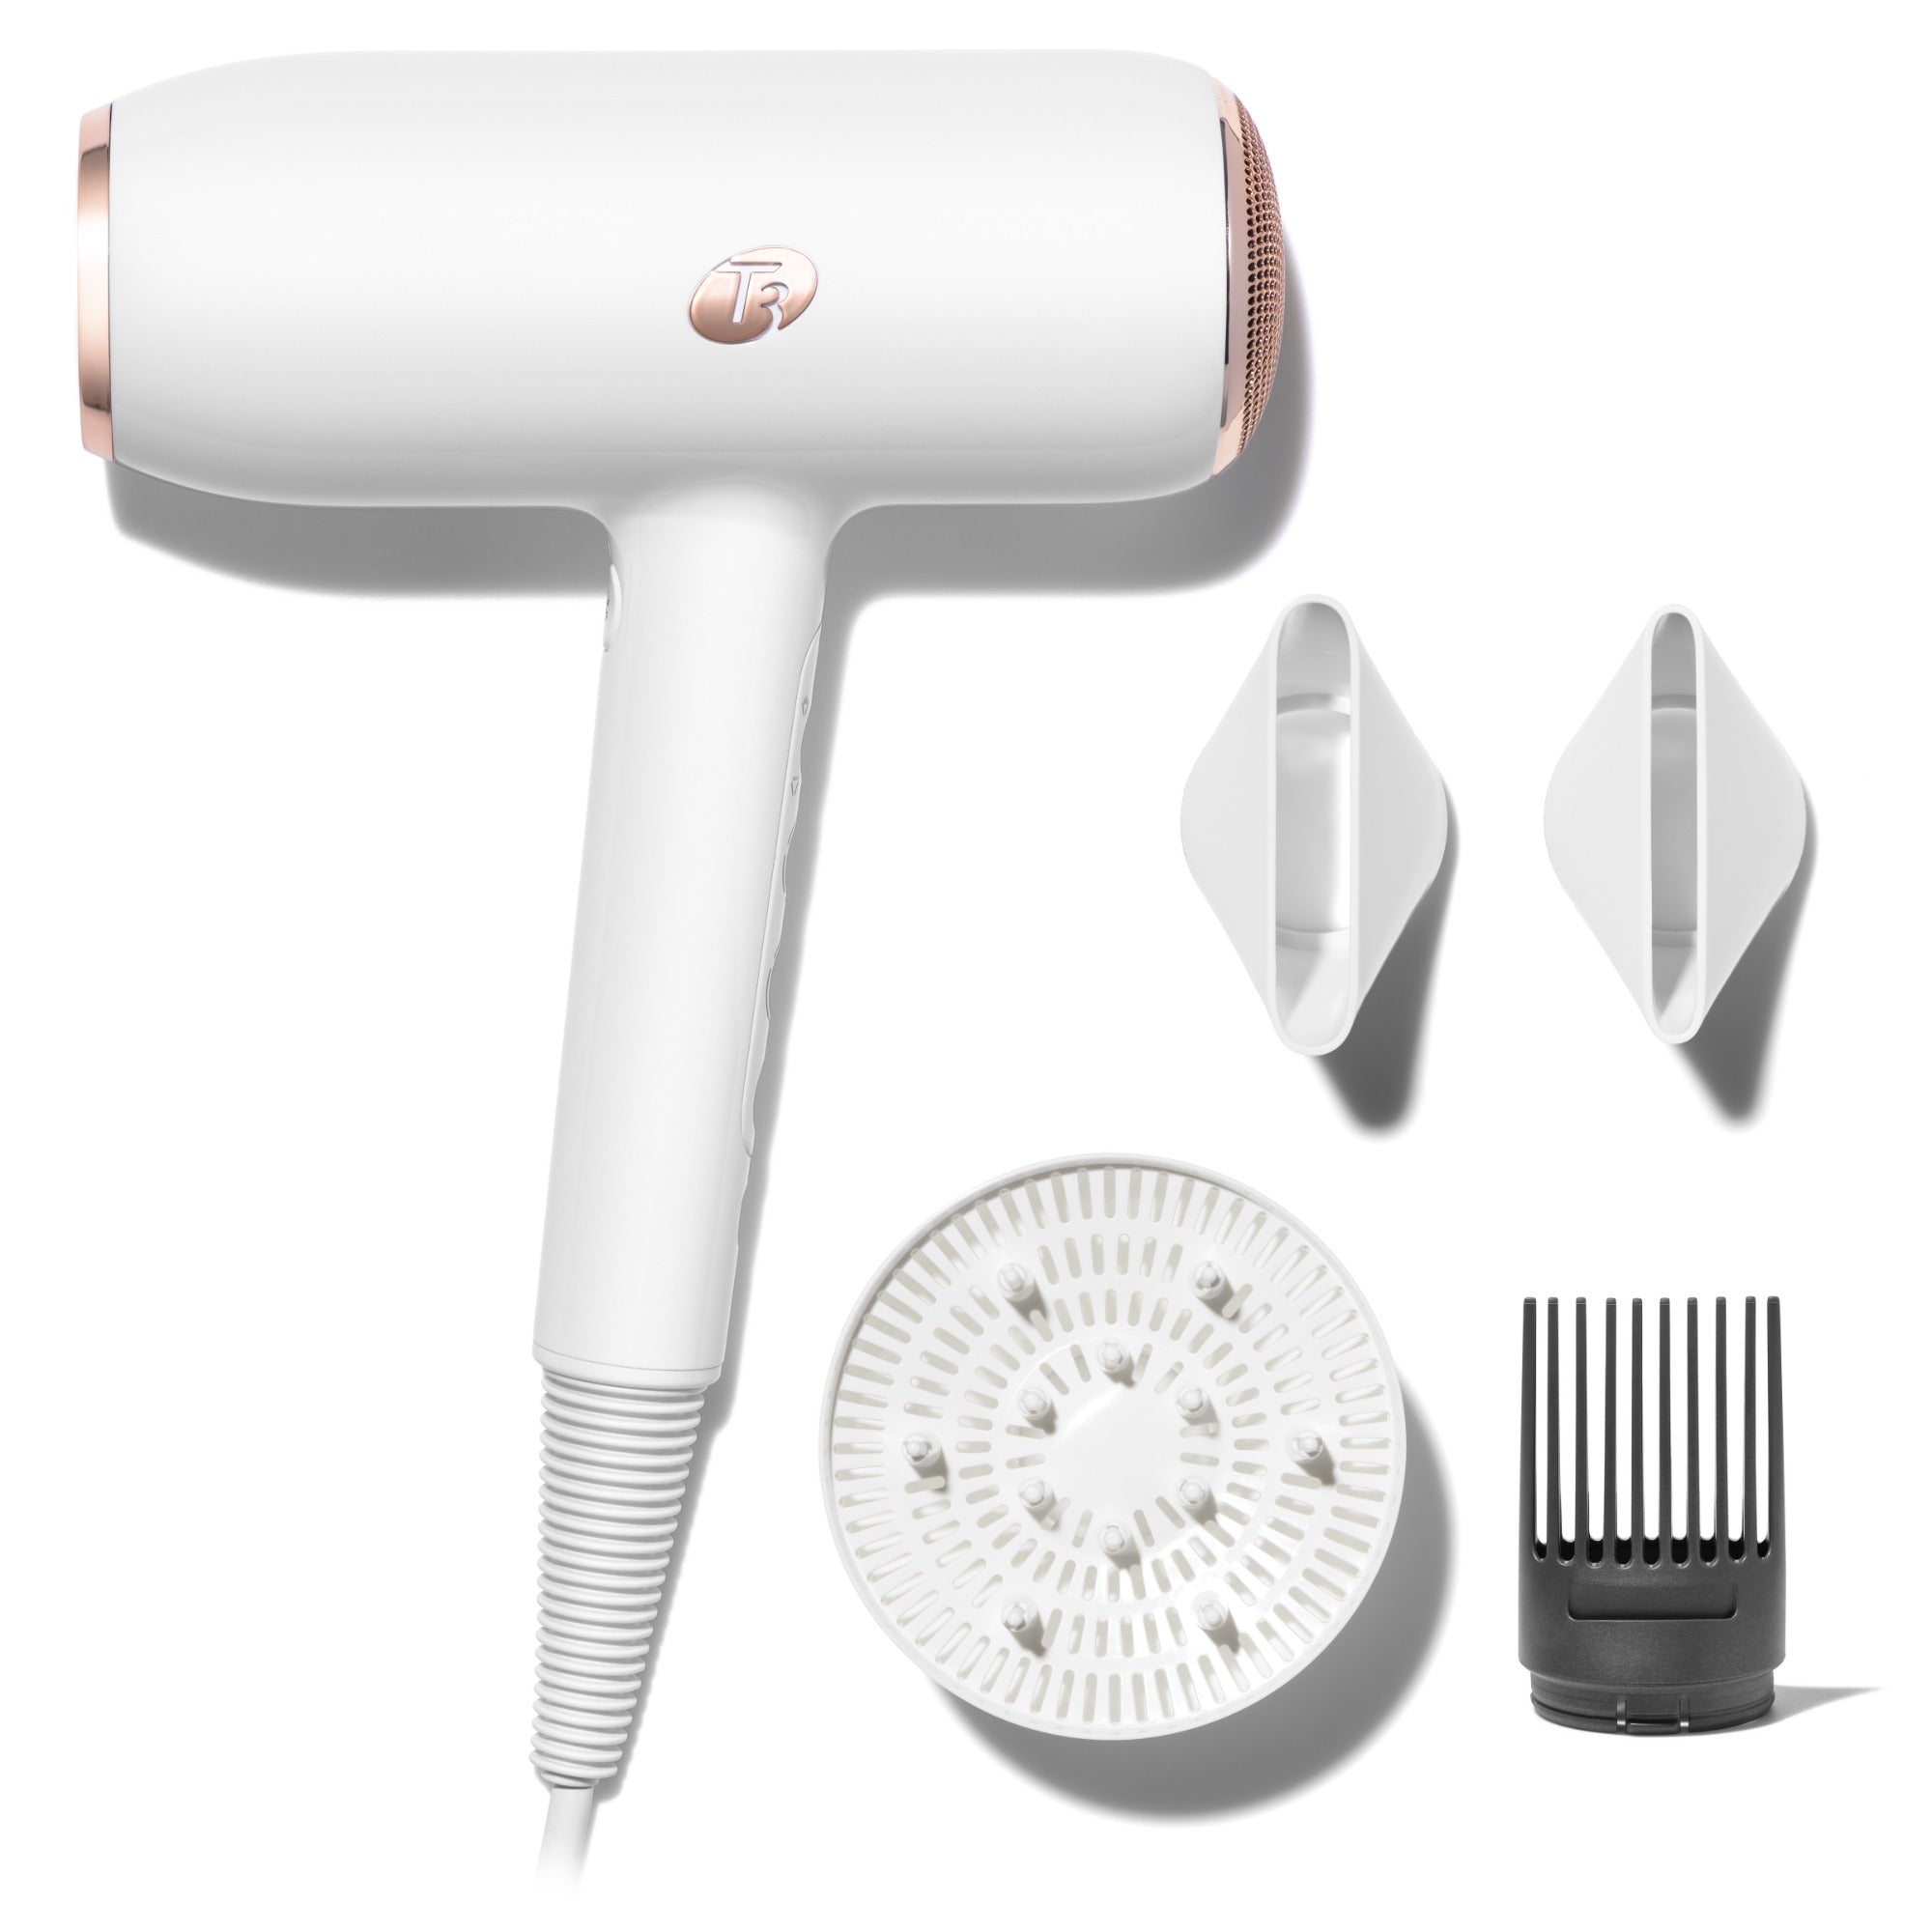 T3 Featherweight StyleMax dryer with four attachments including 2 concentrators, diffuser, and smoothing comb